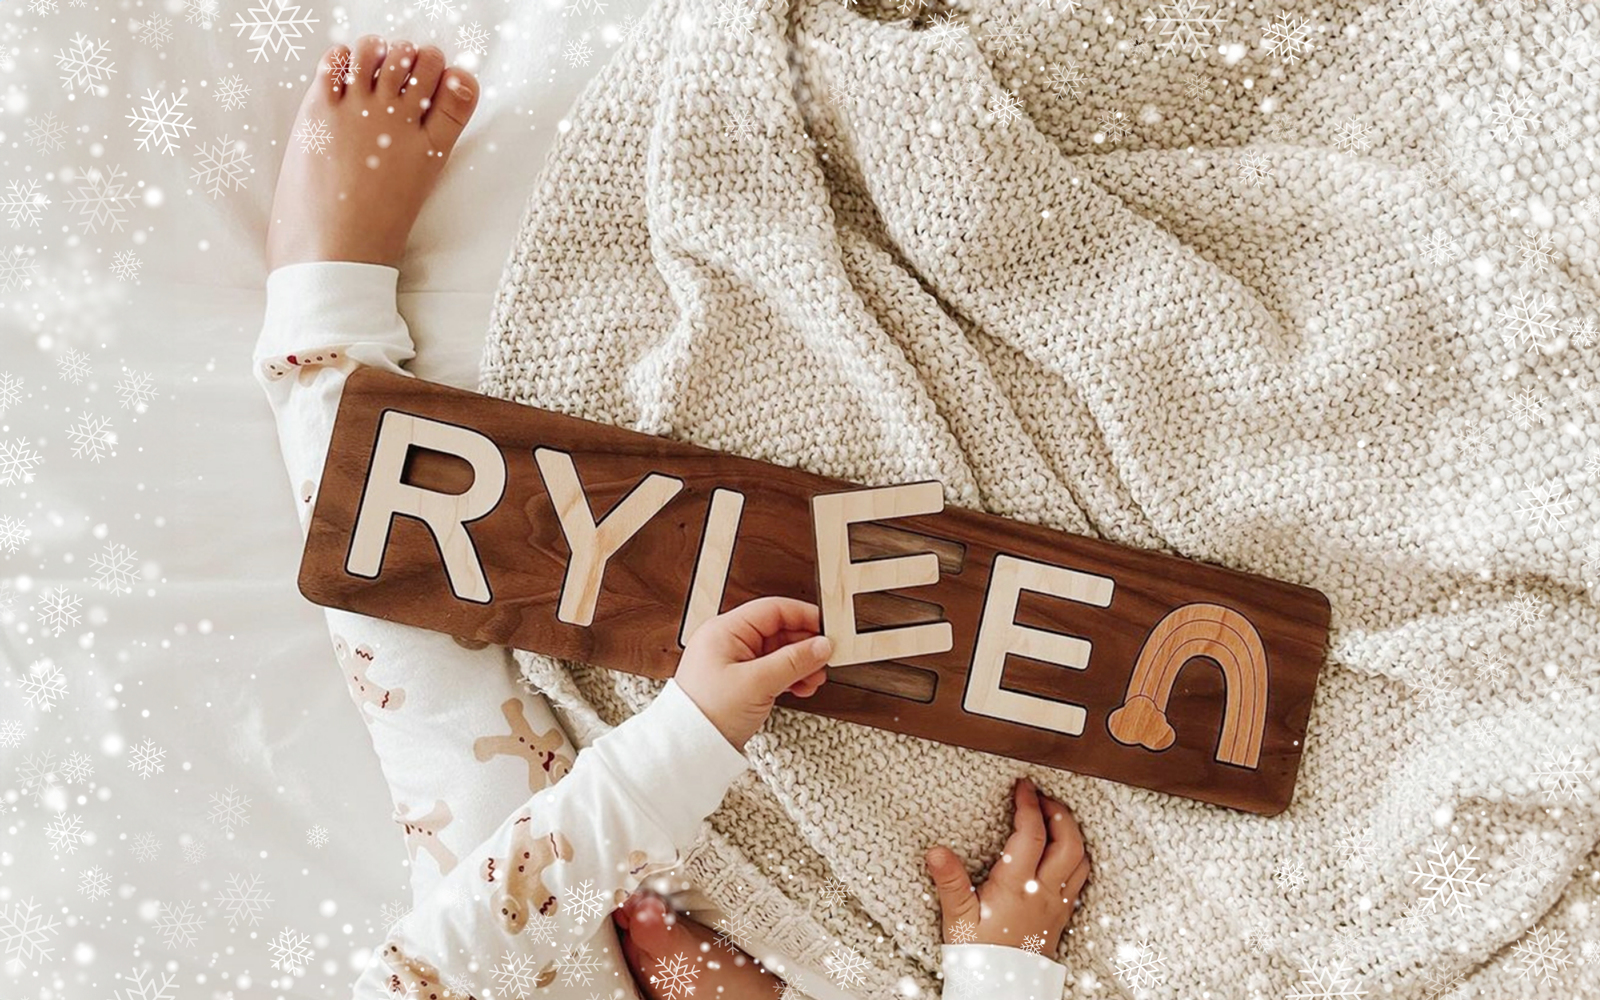 Christmas Gifts for toddlers personalized wood toys stocking stuffers for Baby's First Christmas